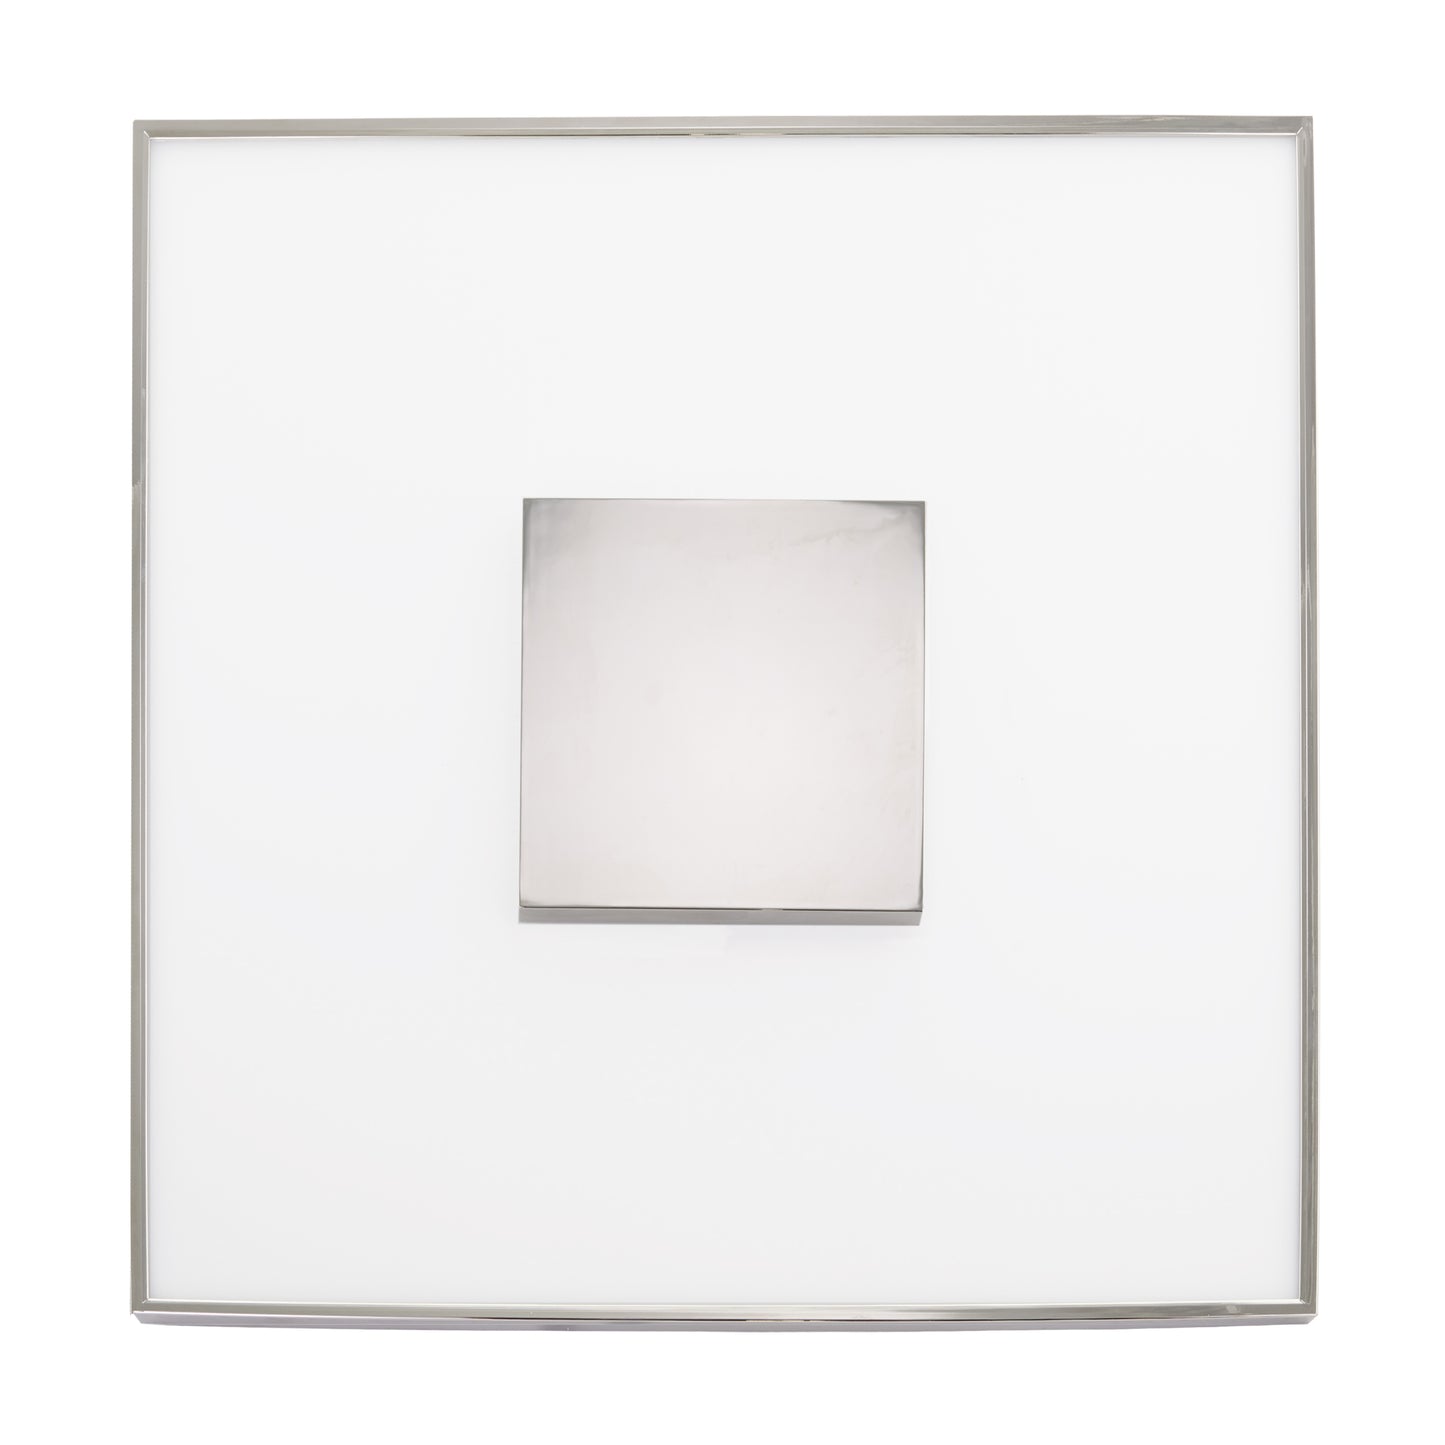 Blink Luxe - 17" Flush Mount 31.5W LED Fixture -  Square Shape with Polished Nickel Finish